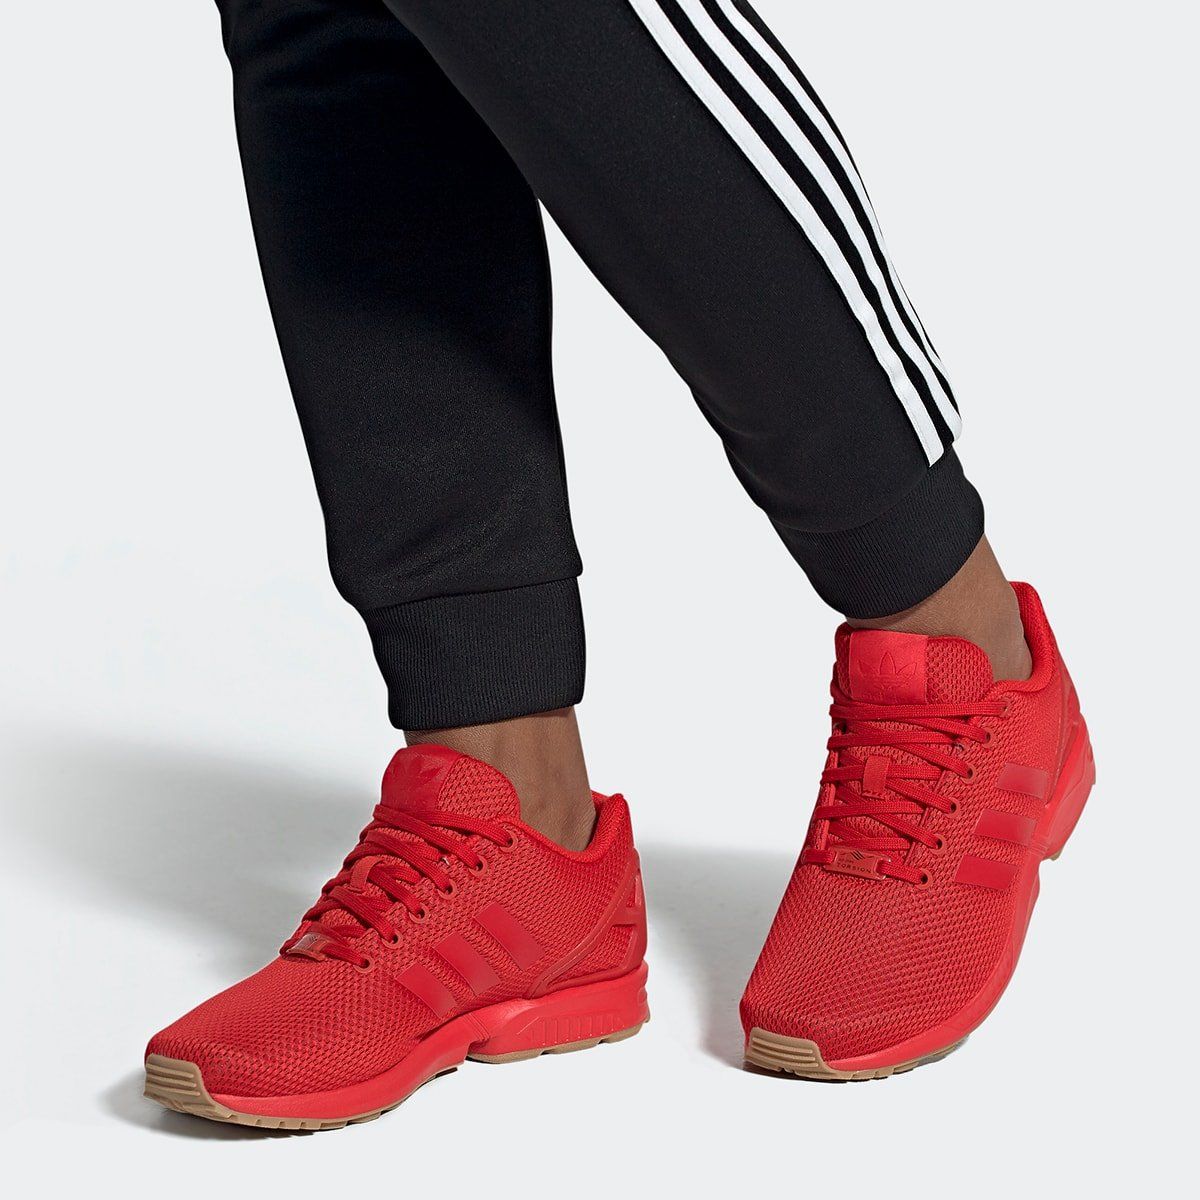 adidas ZX Flux Just Dropped 